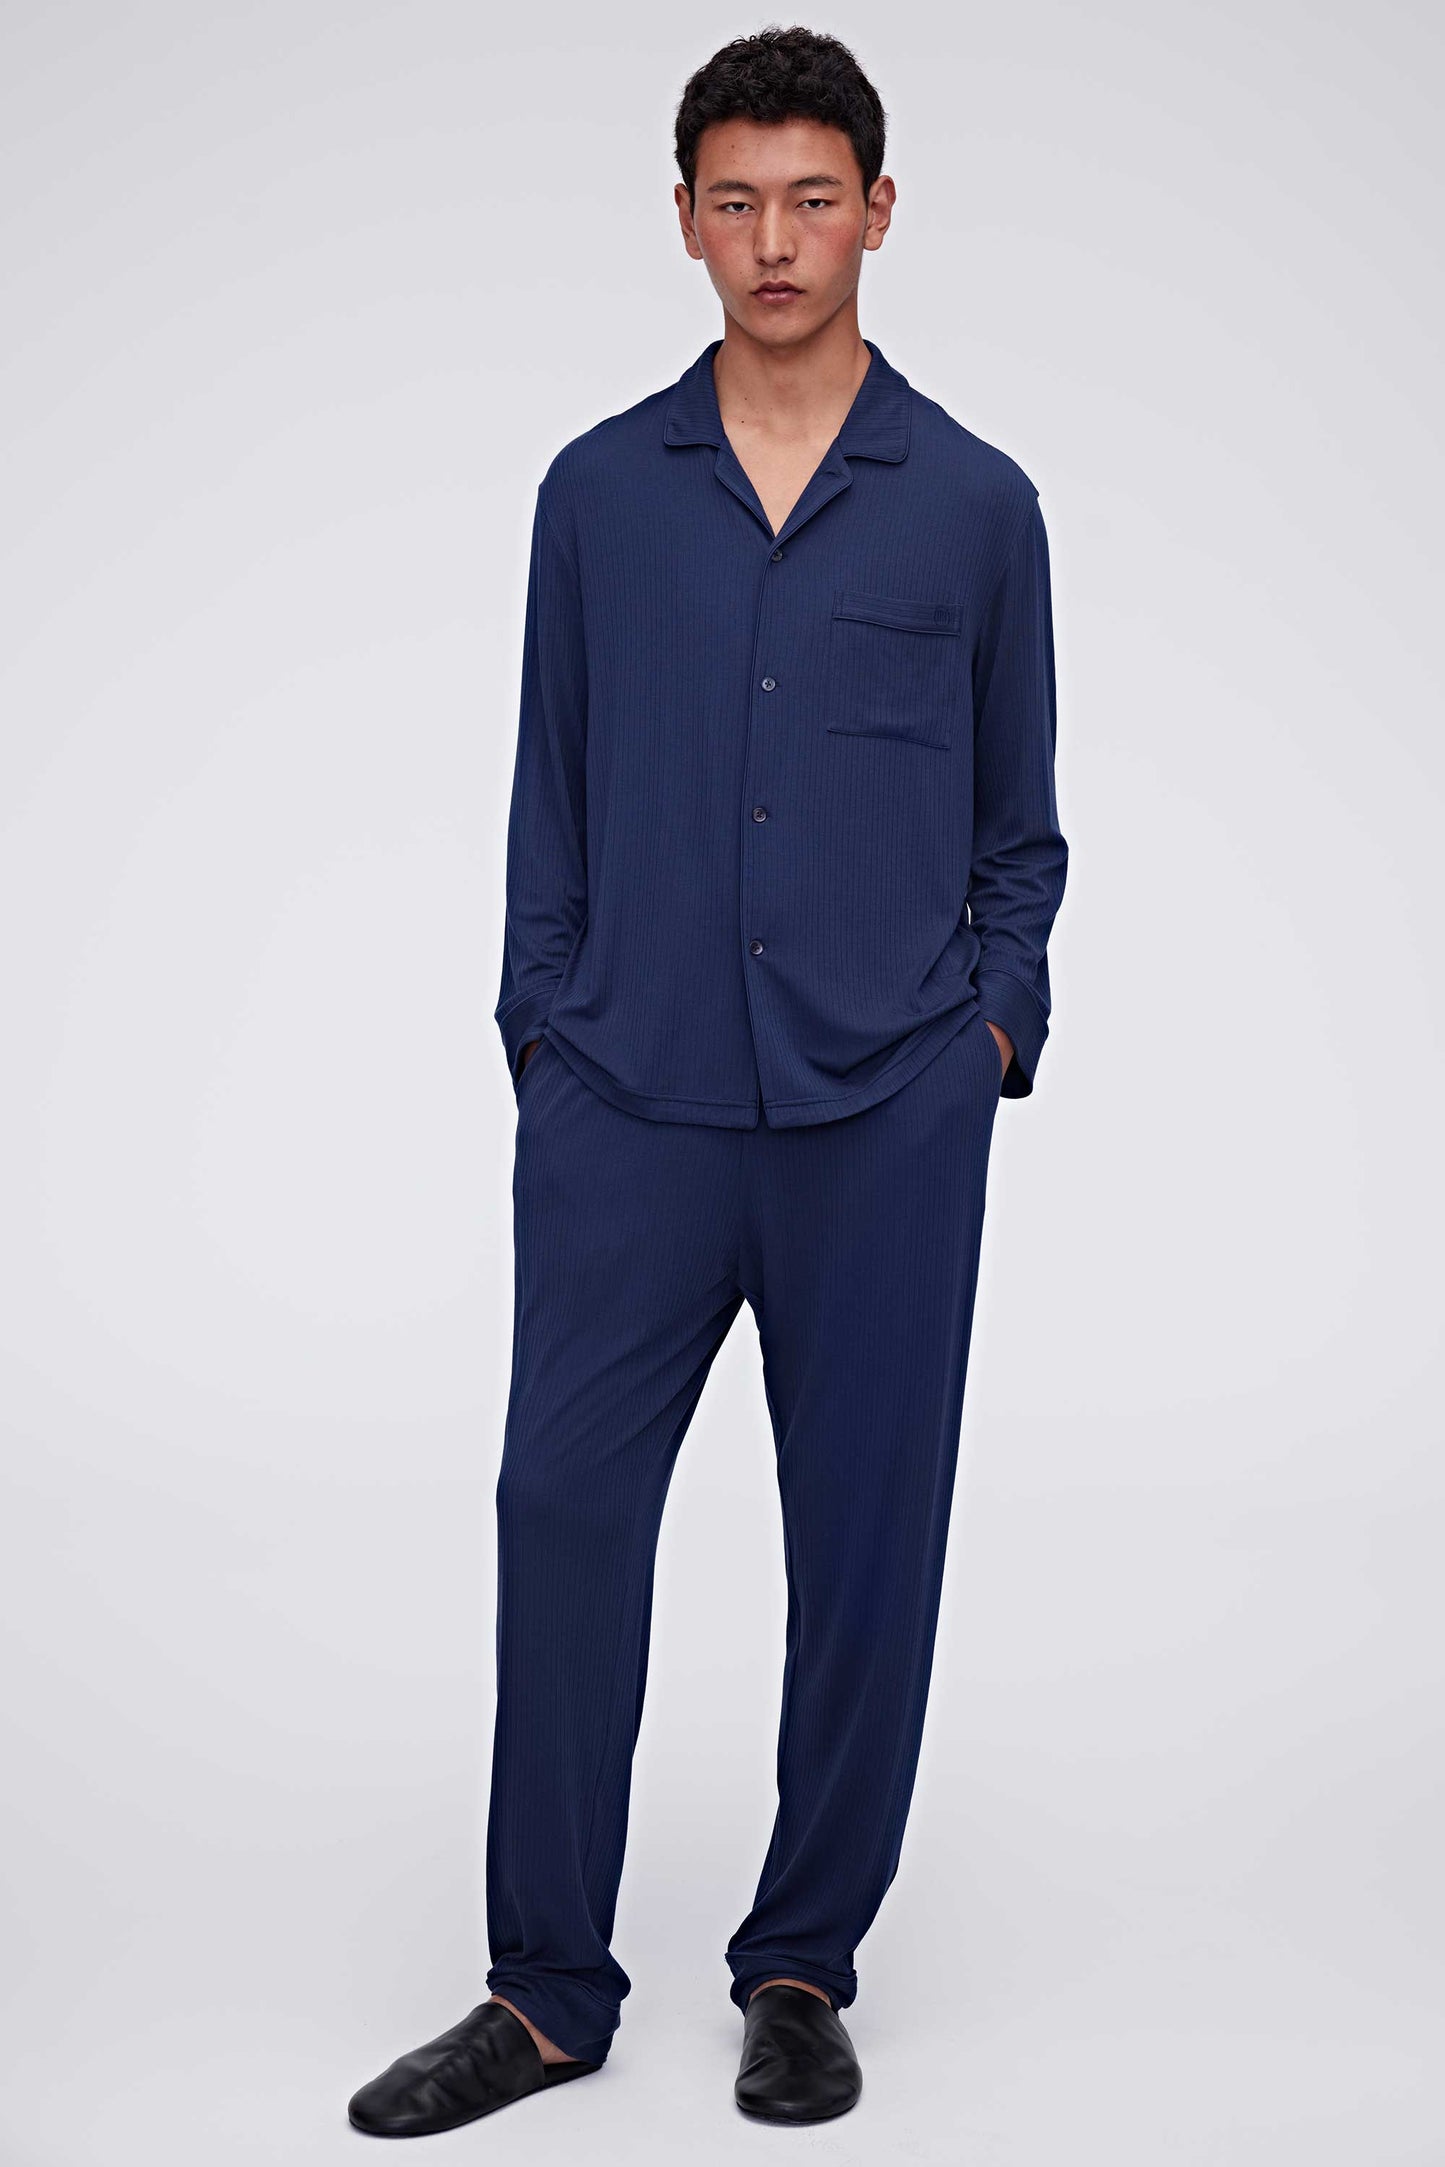 Man in navy pajama top and pants